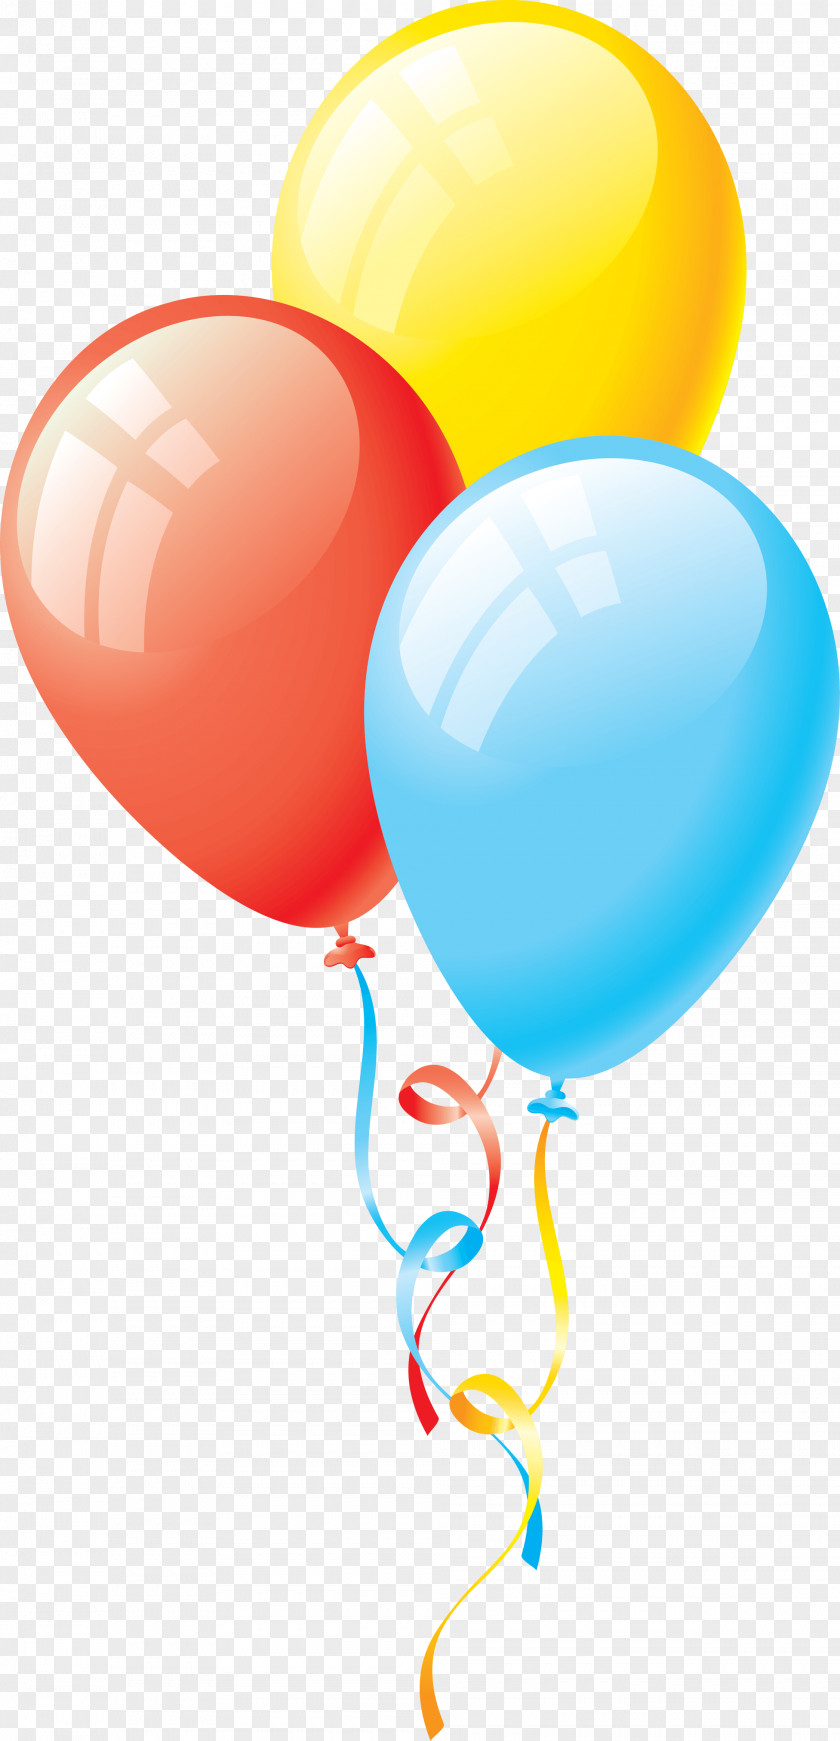 Colorful Balloon Image Download Balloons Clip Art PNG